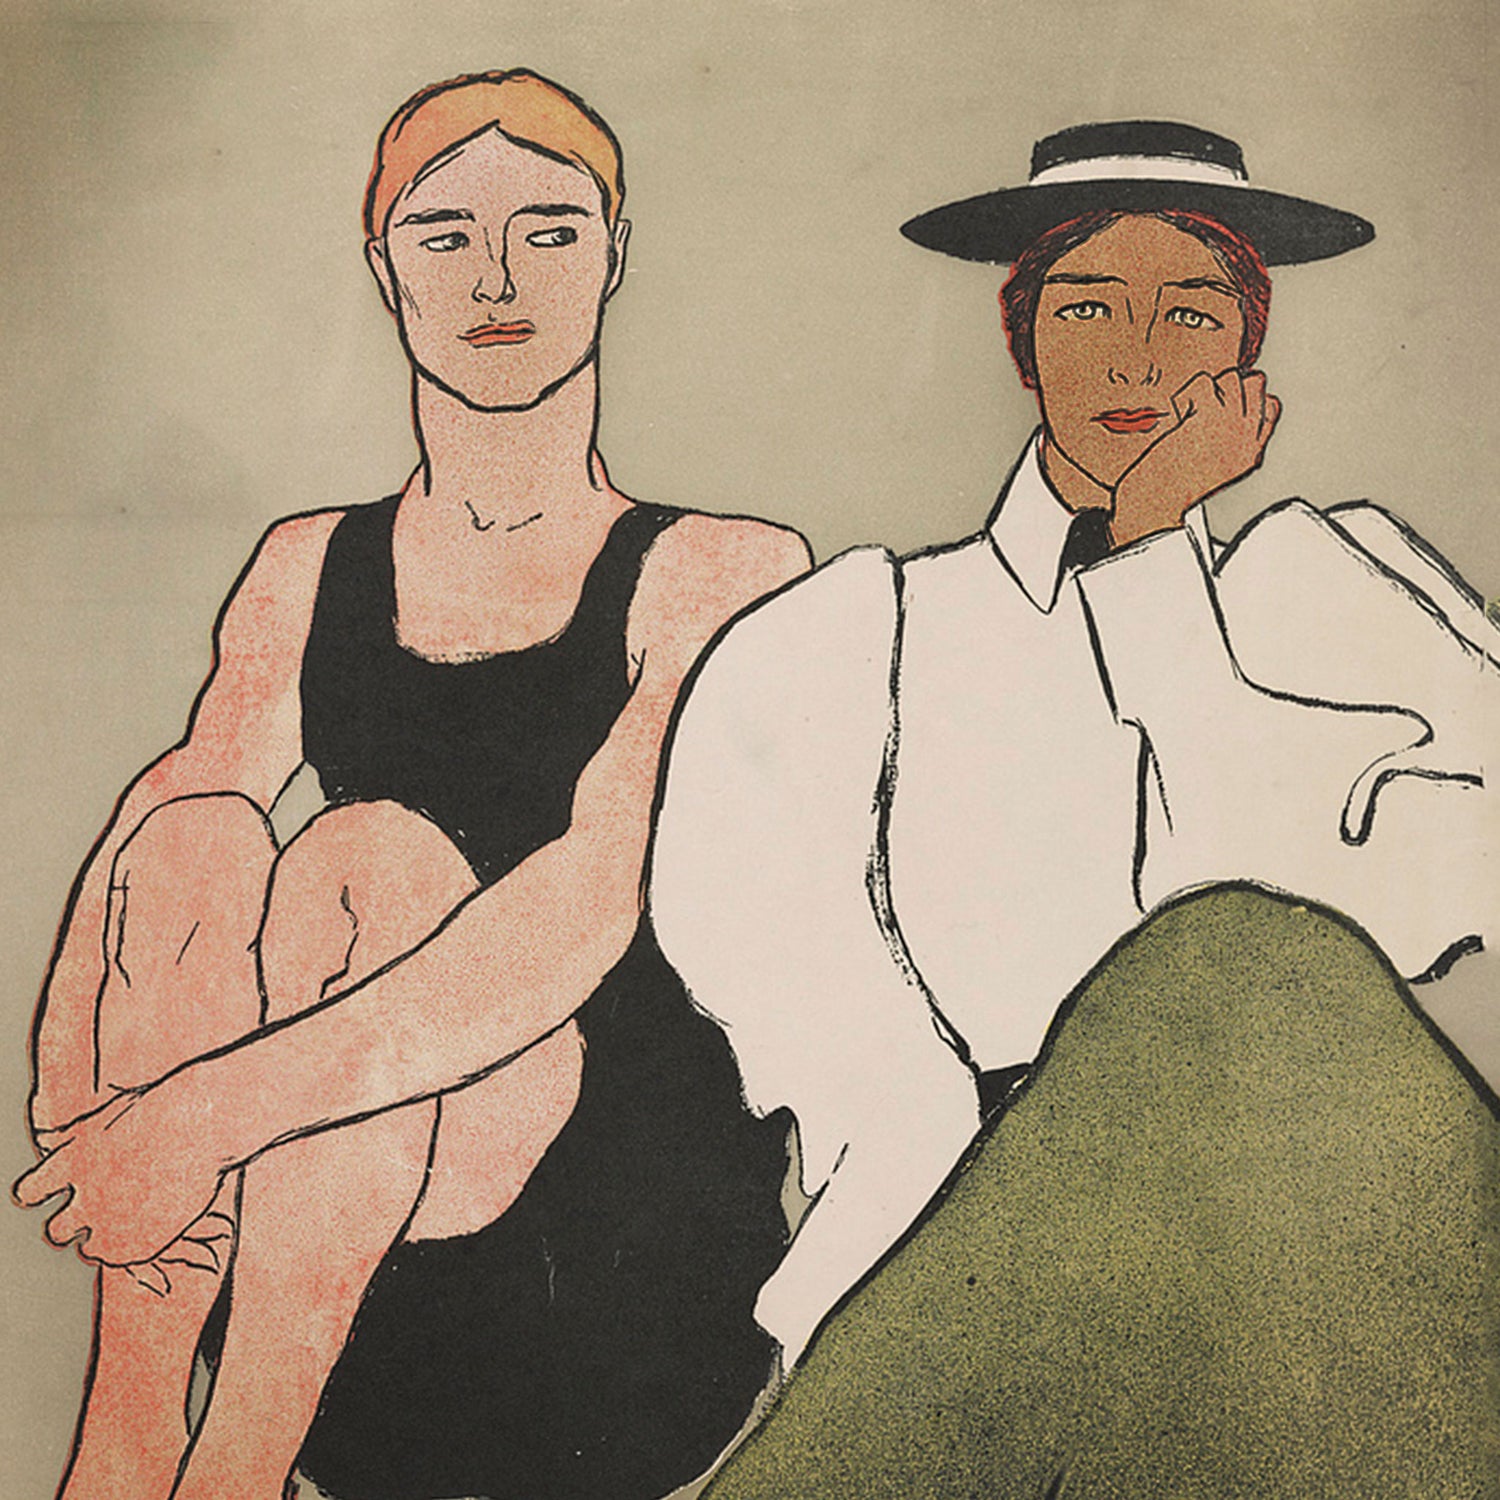 Vintage illustration from Harpers Magazine of a man in a bathing suit and a woman in a hat